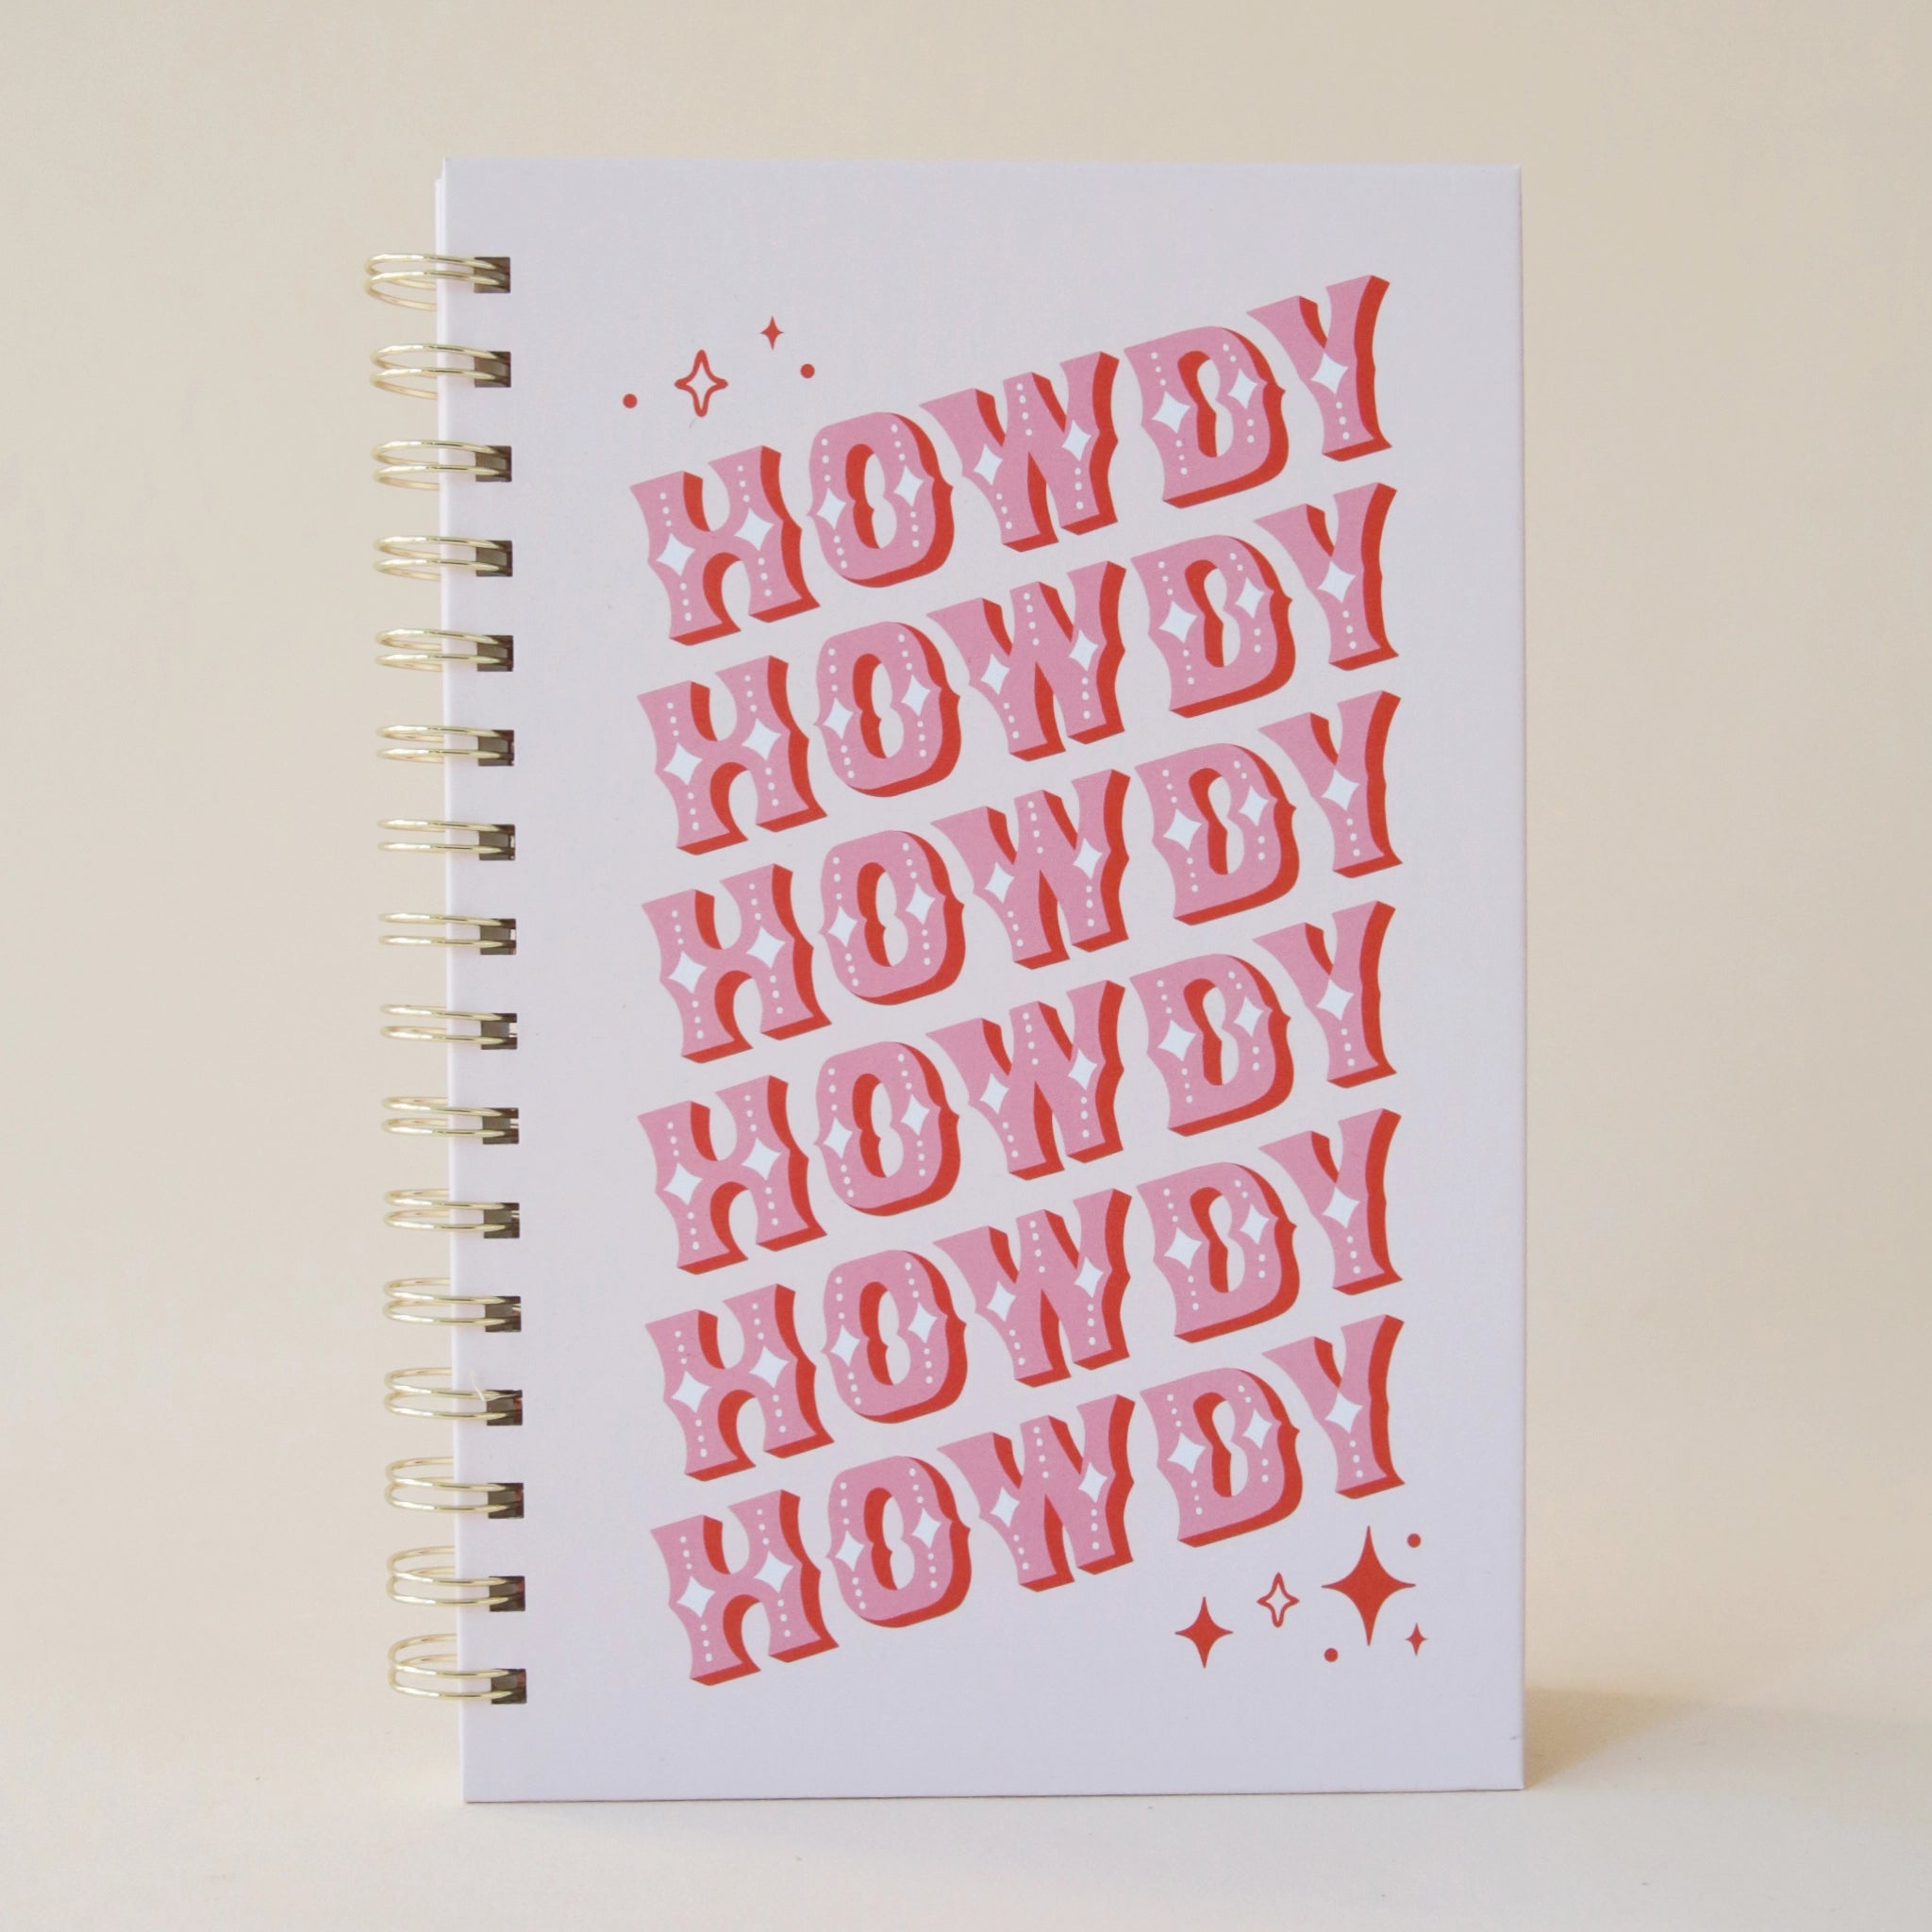 A light purple / cool toned pink notebook with the word &quot;Howdy&quot; slightly angled and stacked six times in pink western font and featuring a spiral bound detail.